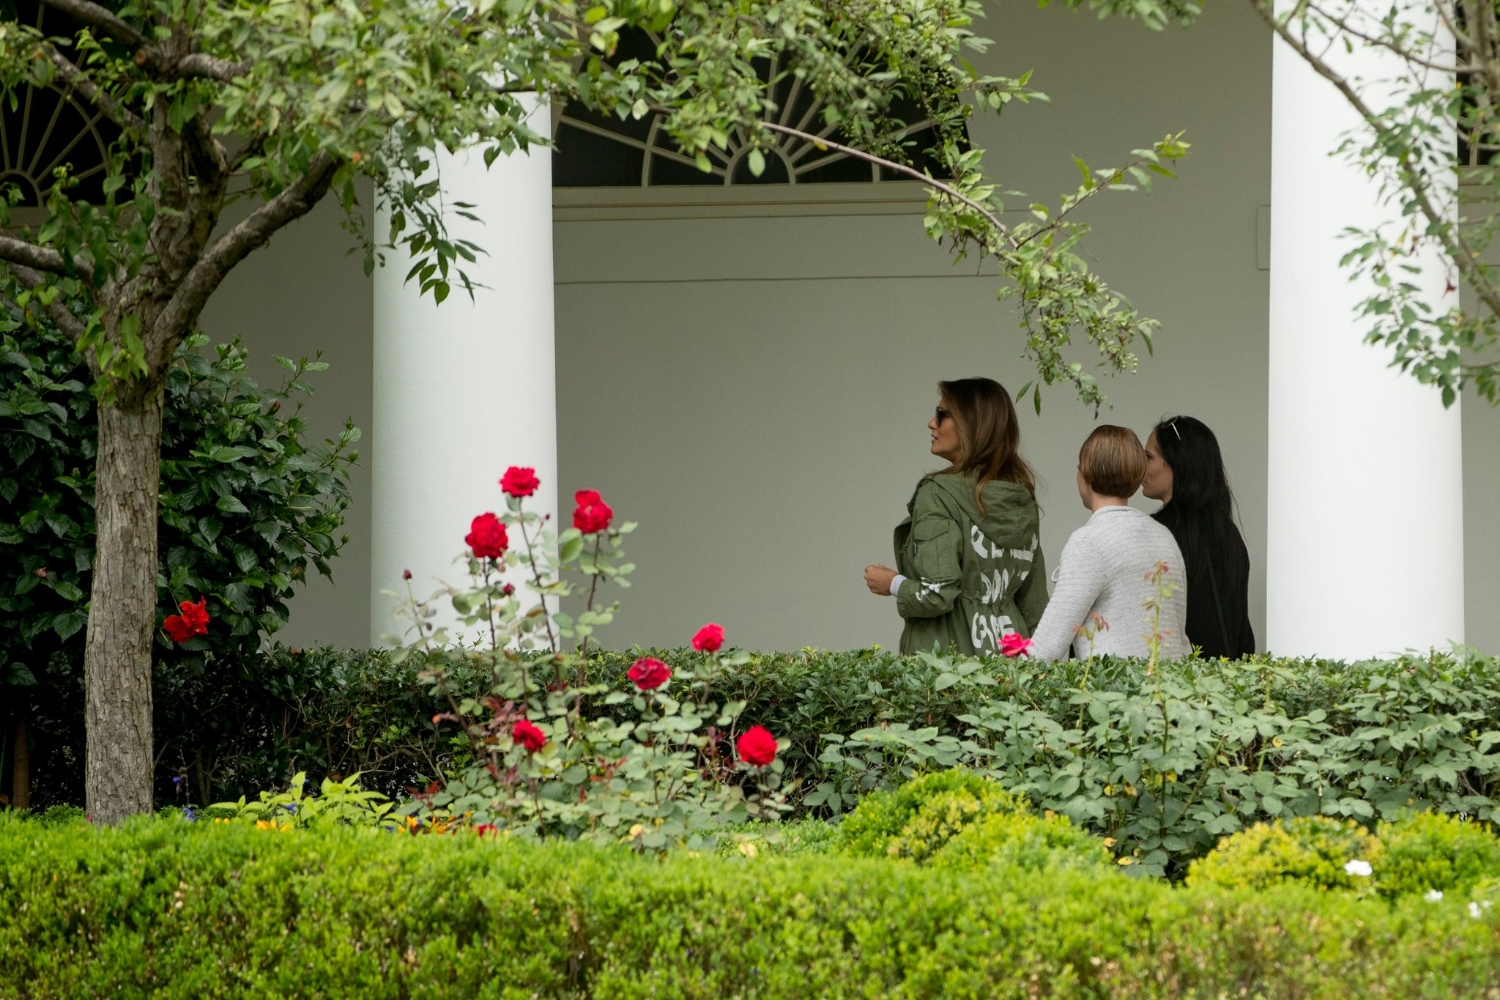 First lady Melania Trump made an unannounced trip to visit immigrant children at a shelter in Texas yesterday. Here she returns to the West Wing of the White House in her news-making jacket.CreditAndrew Harnik/Associated Press